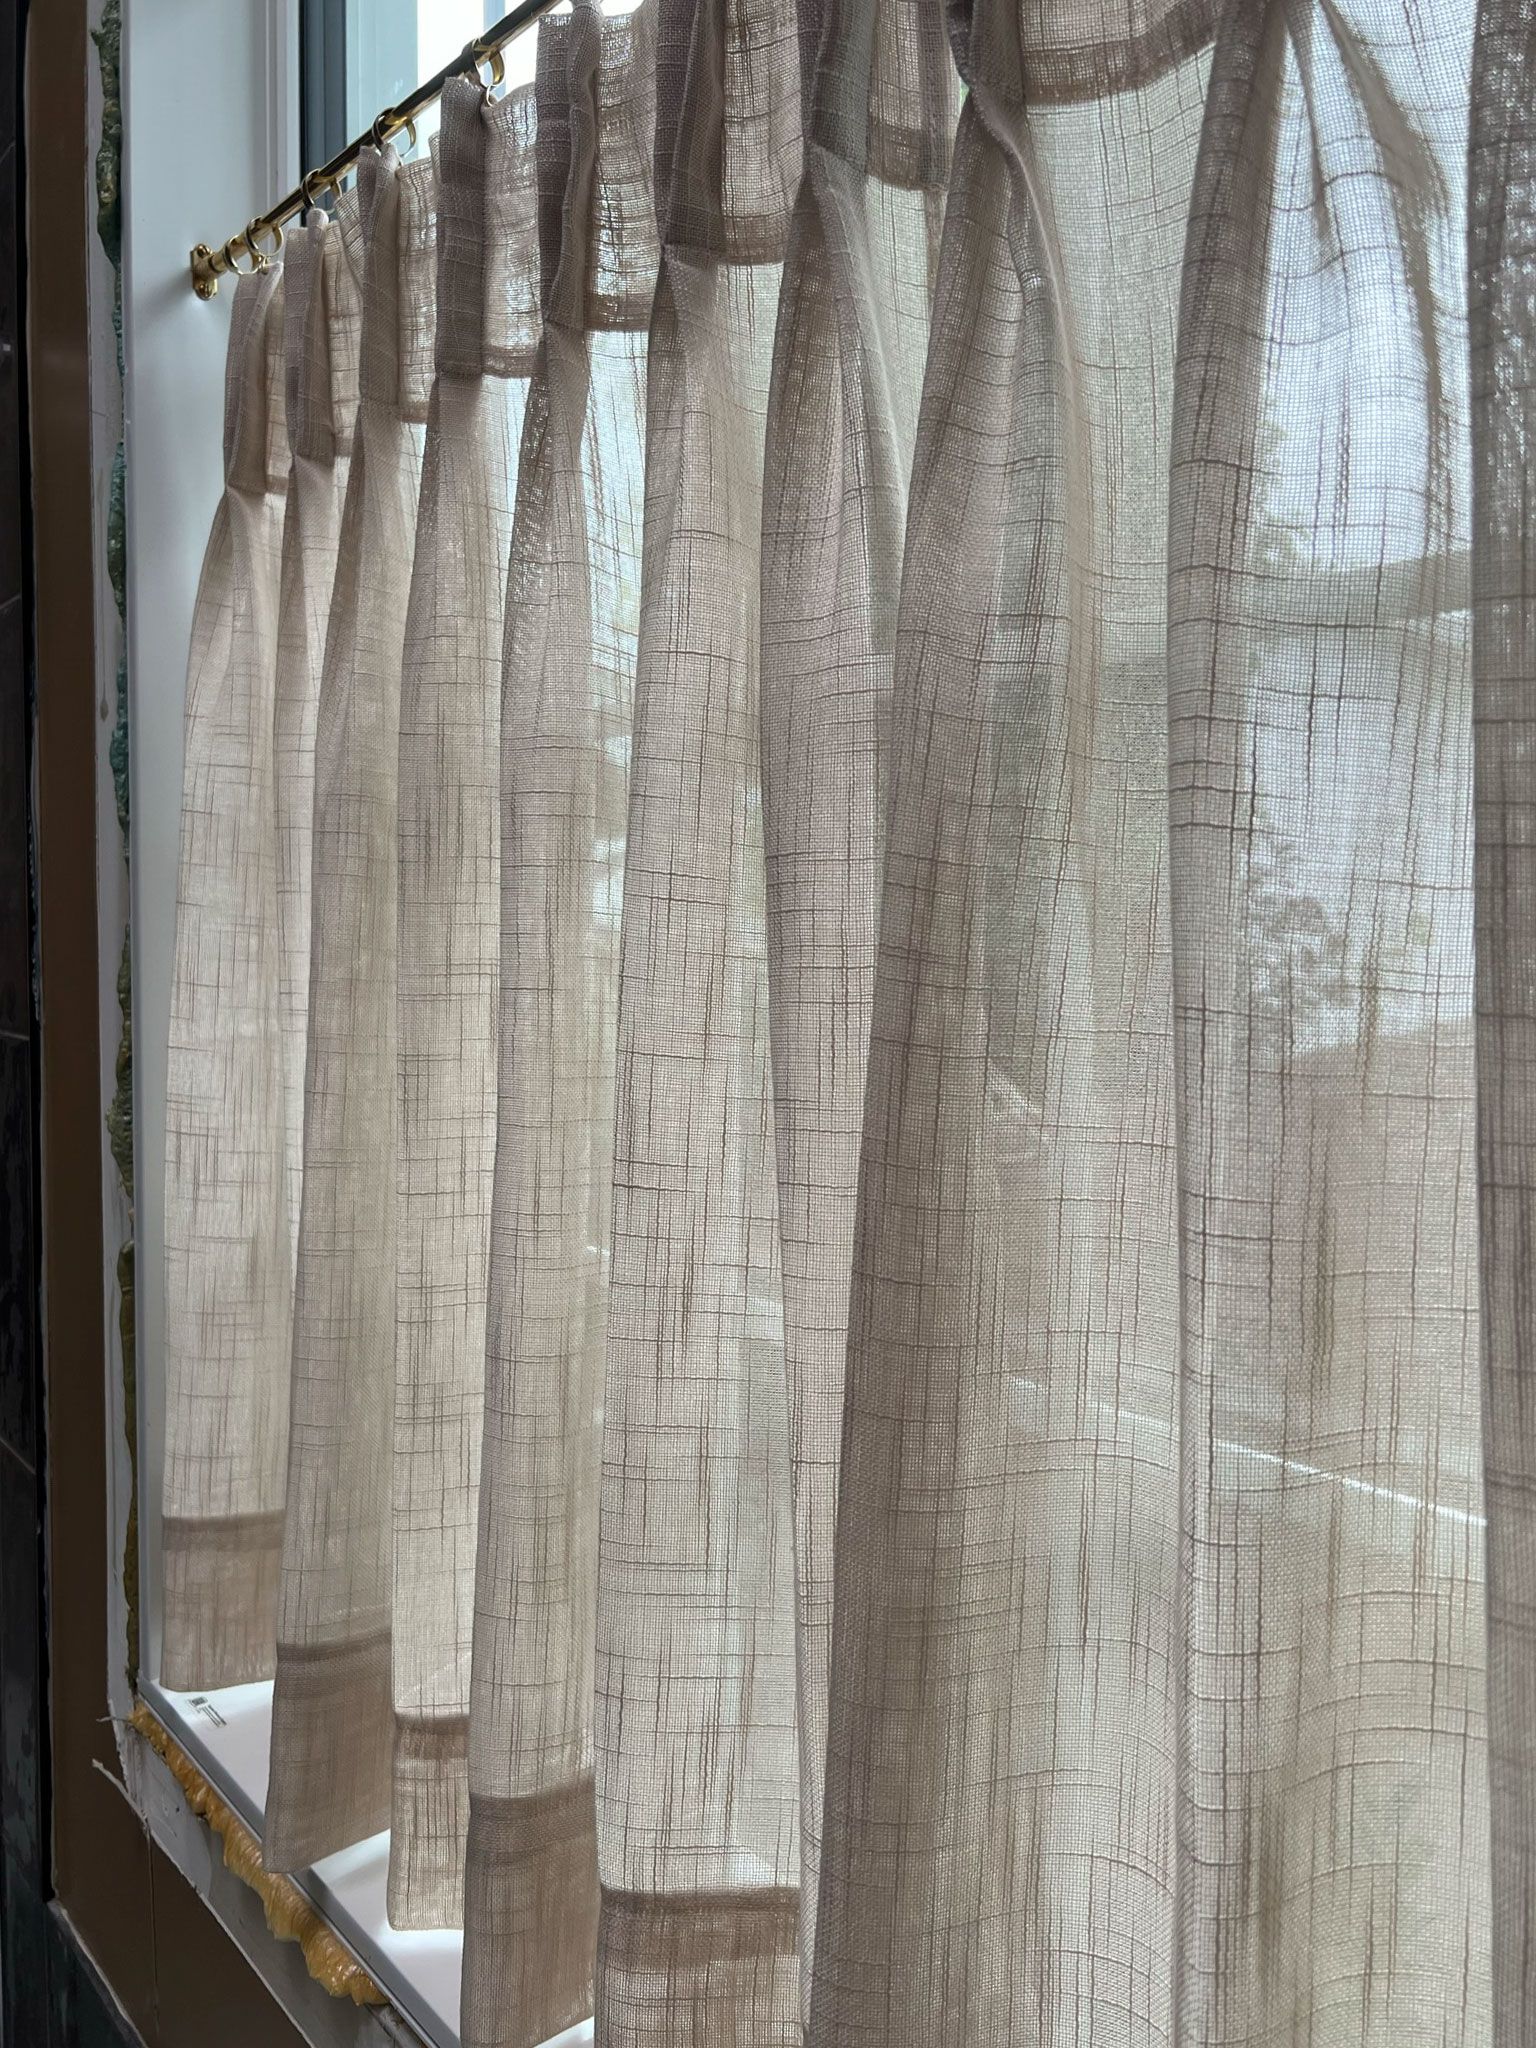 Pleated Curtains: Adding Texture and Sophistication to Your Space